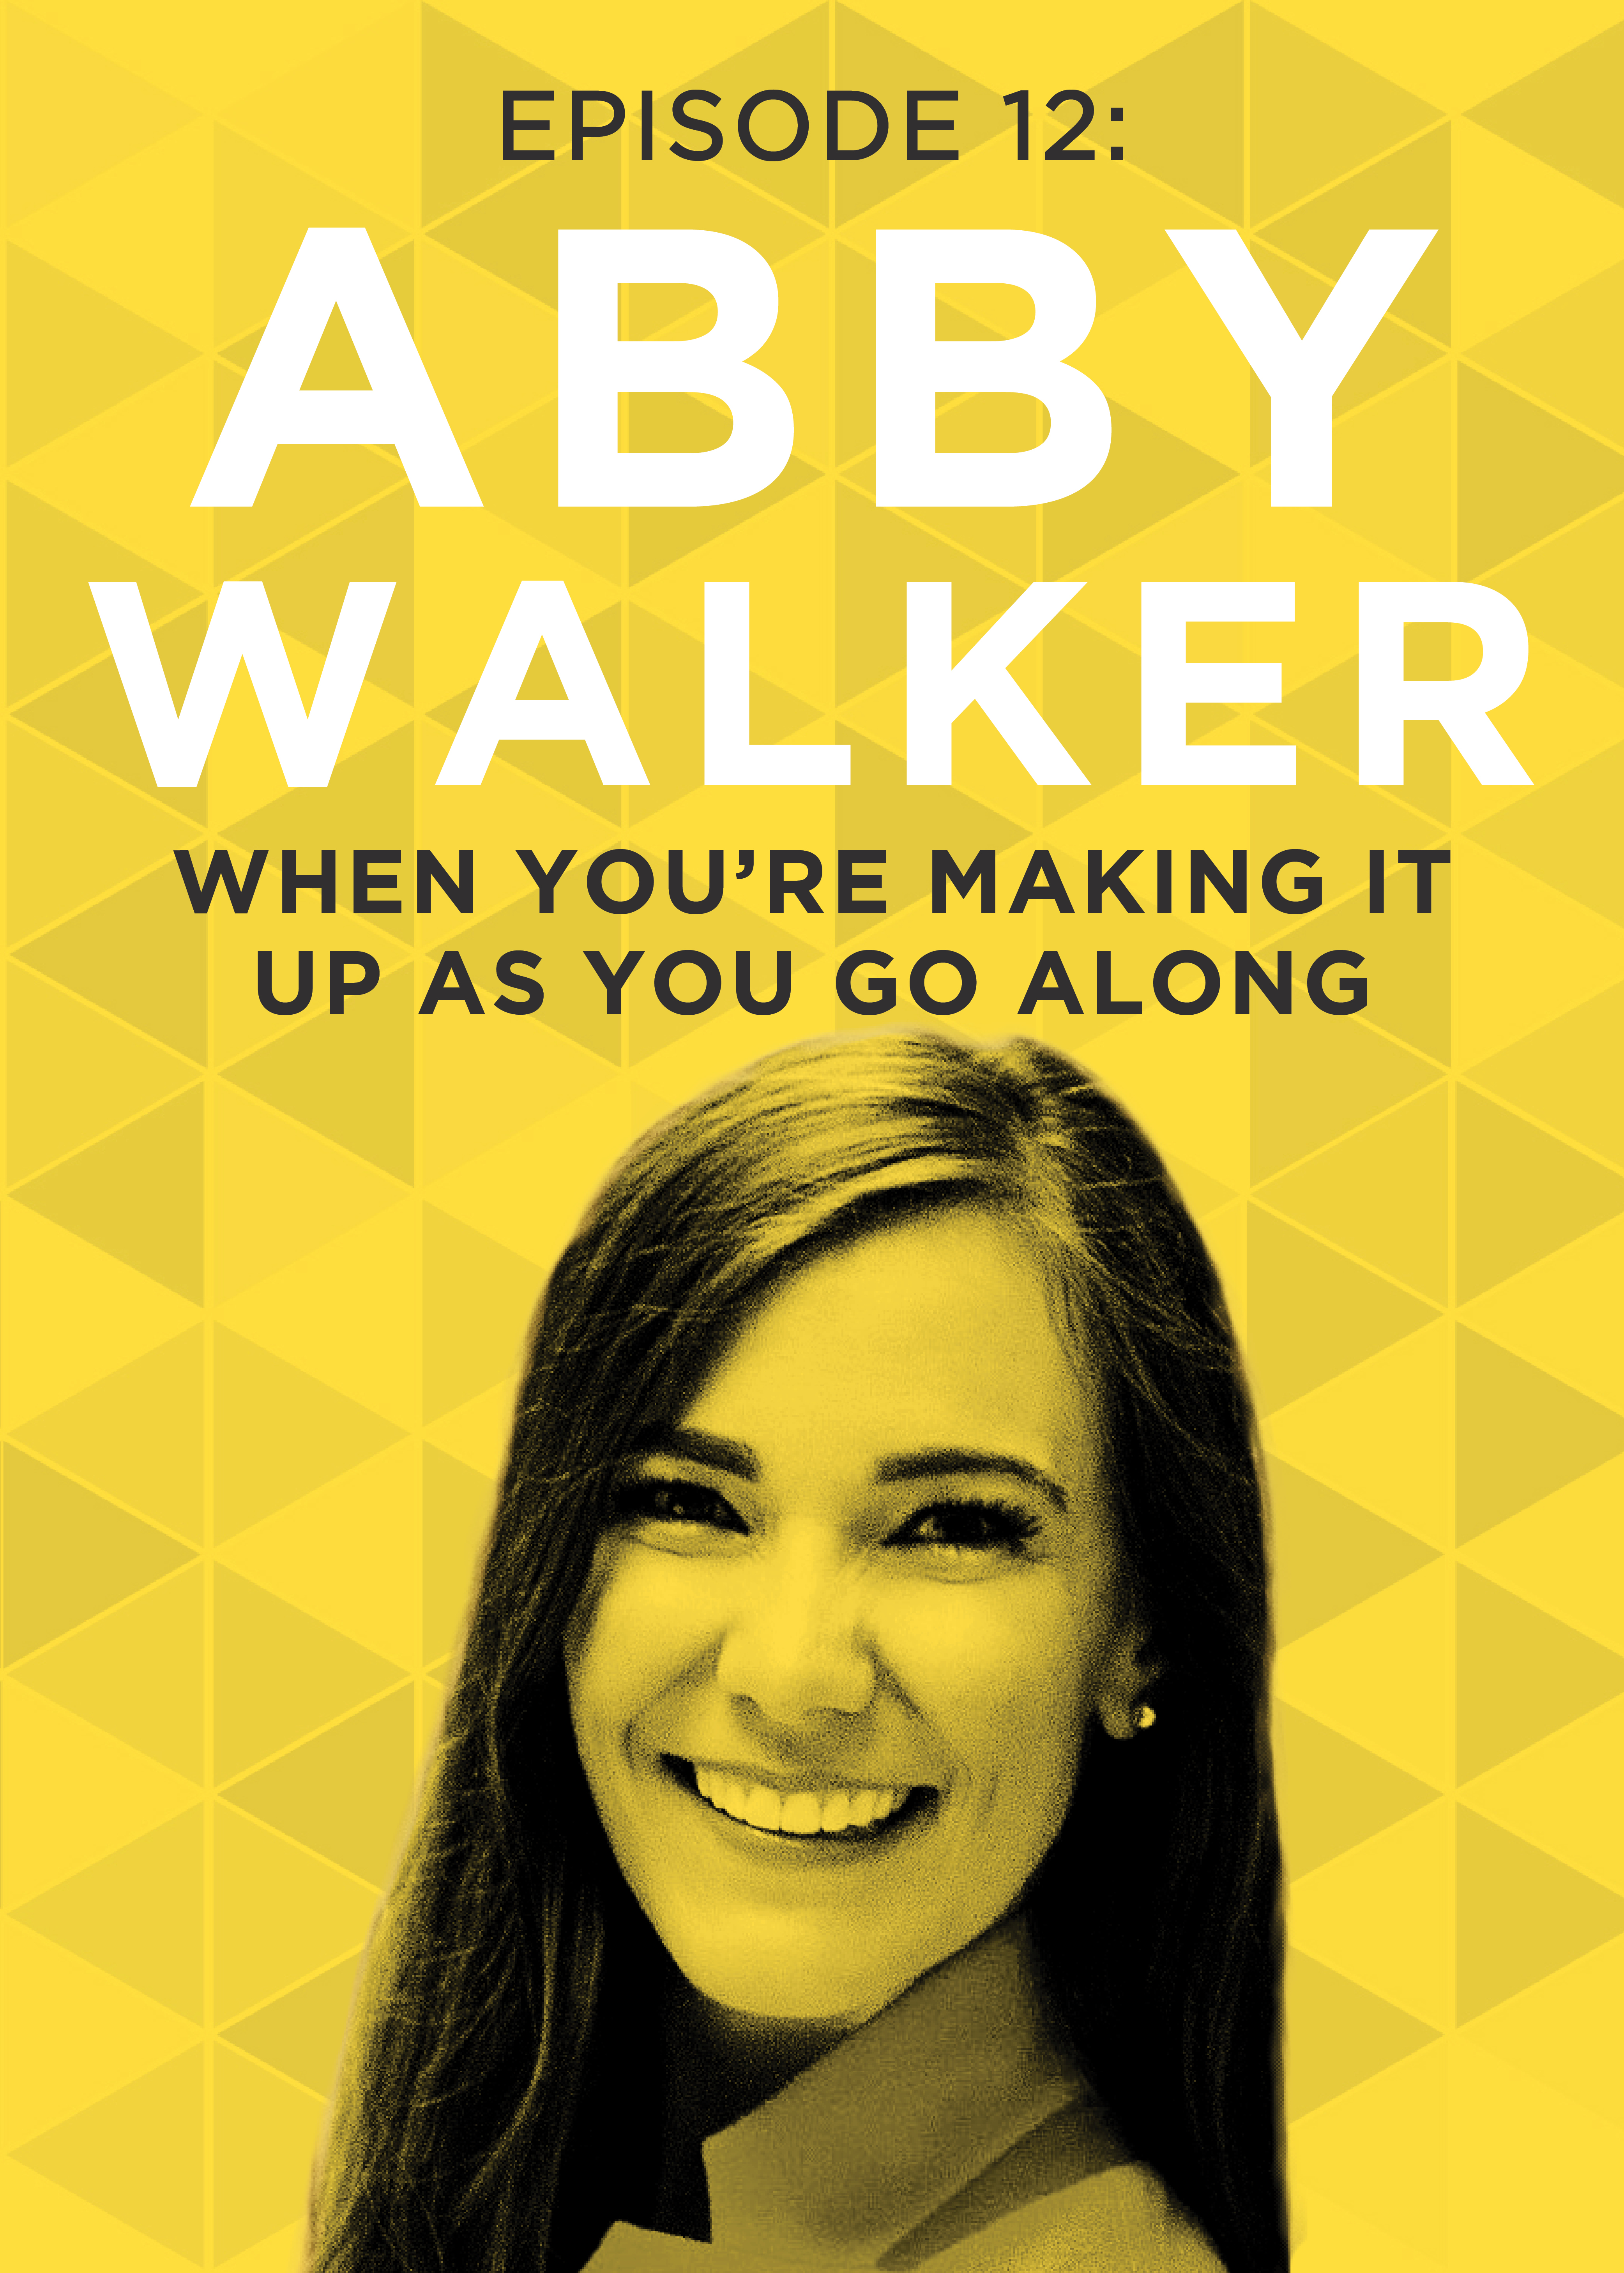 EP 12: When You’re Making it Up as You Go Along with Abby Walker